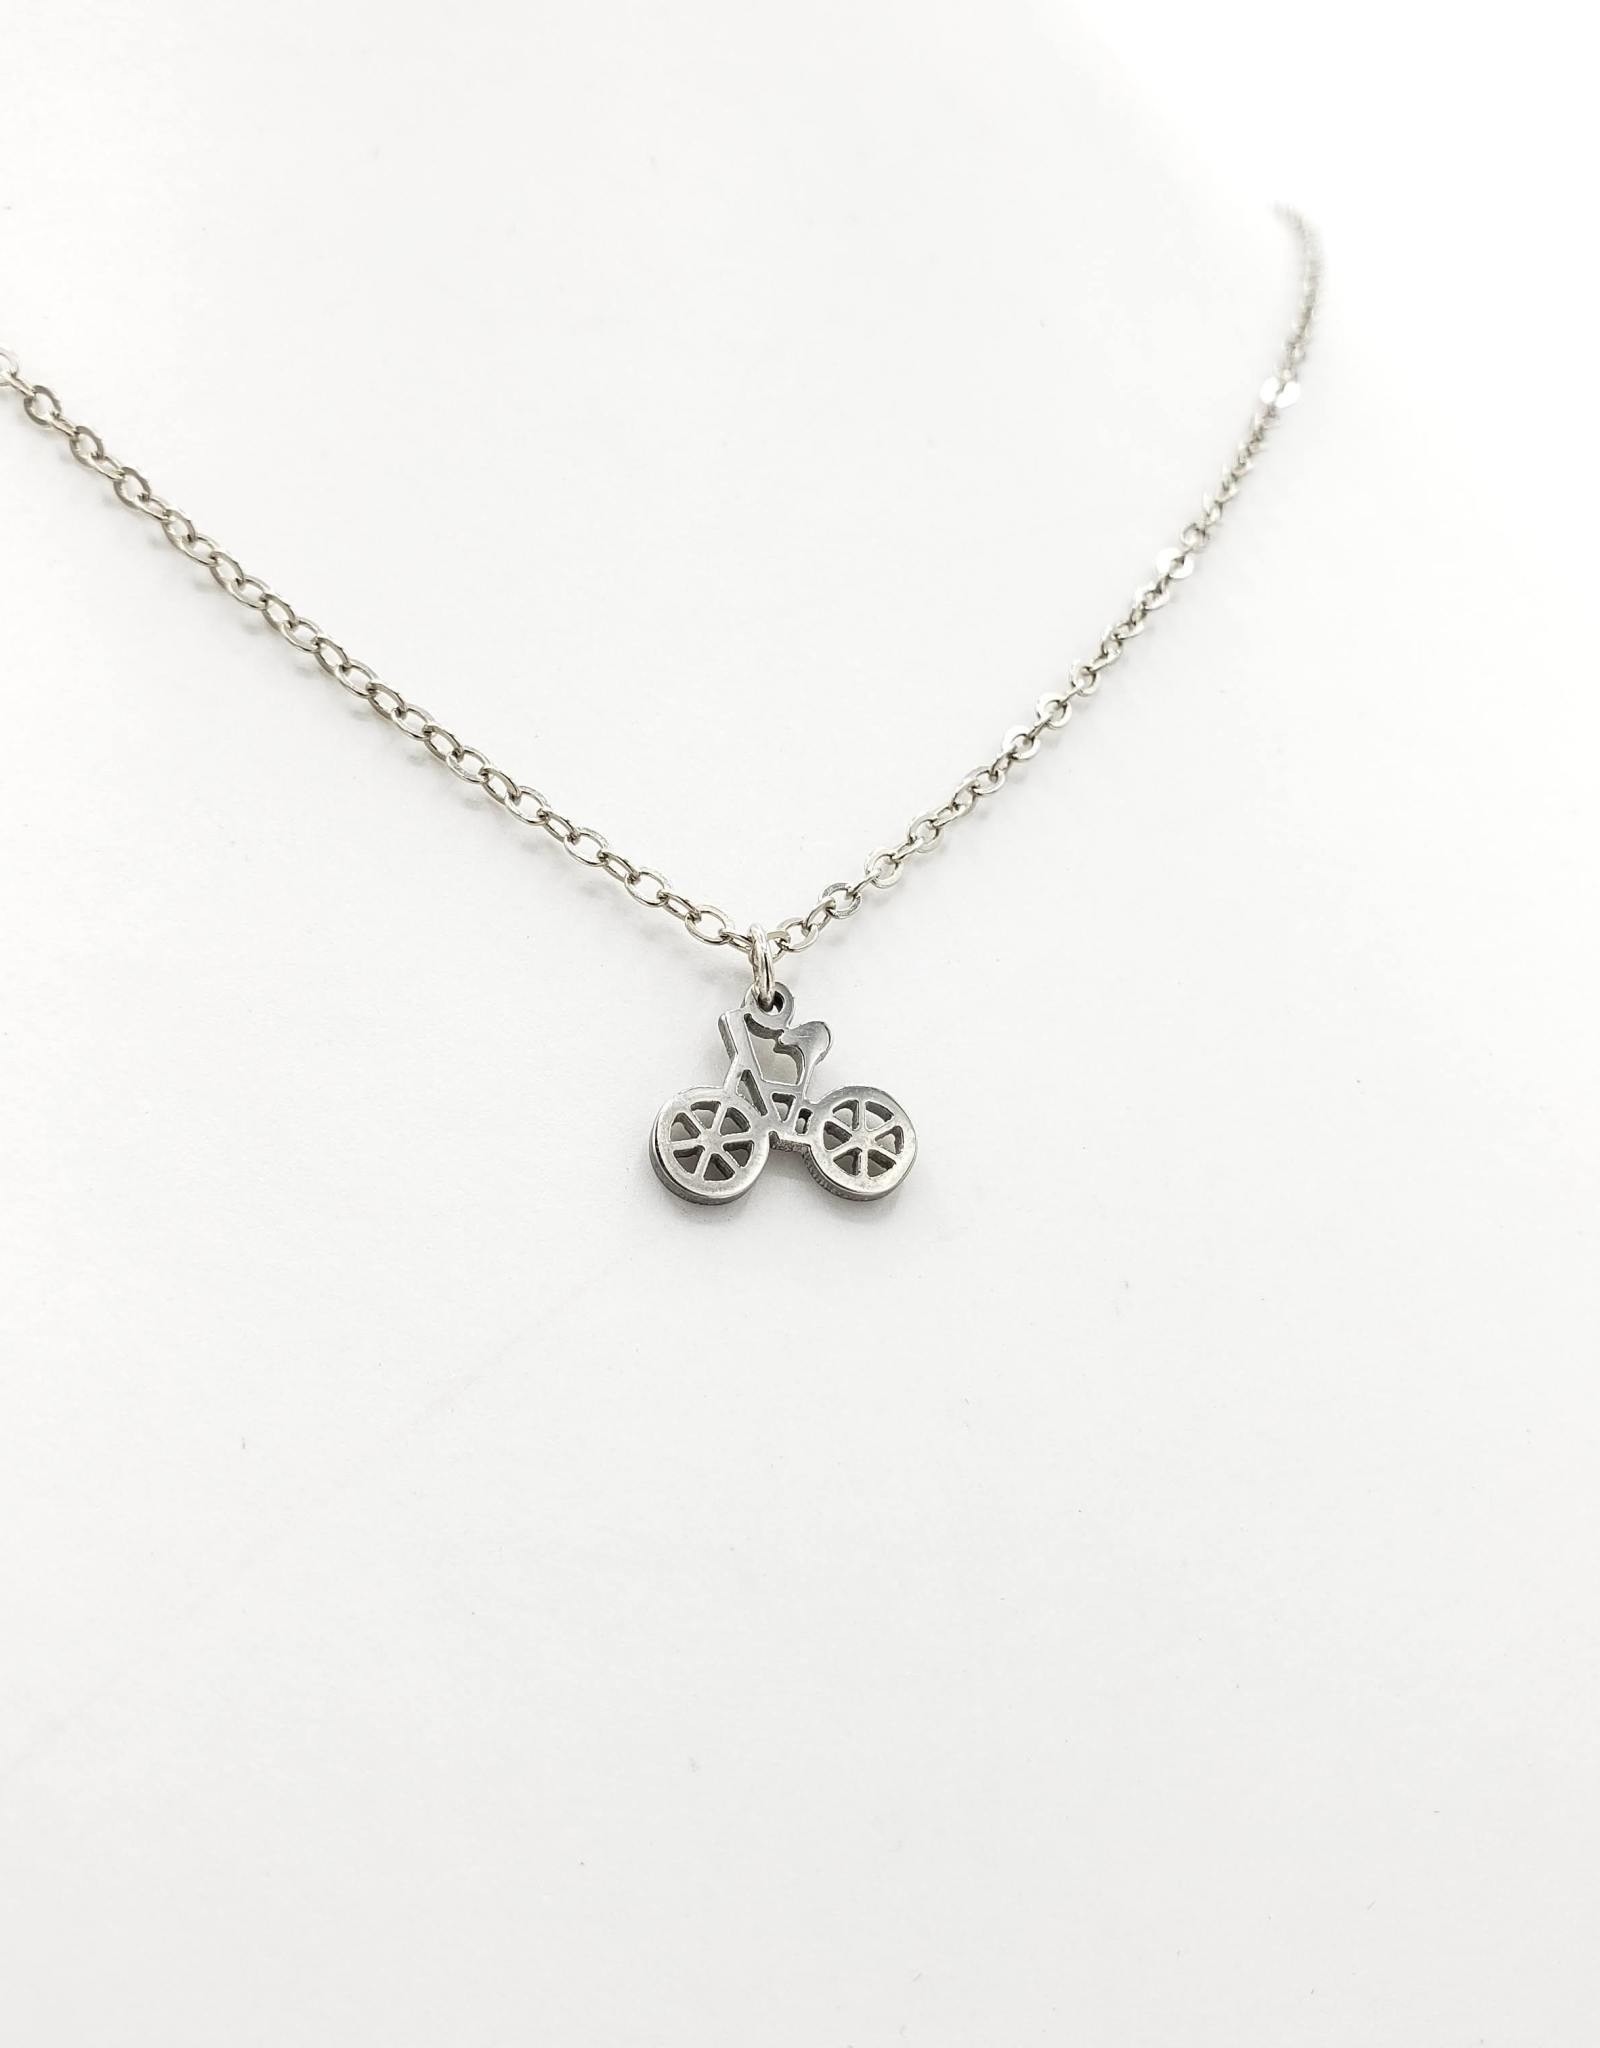 Bicycle Necklace - silver plated